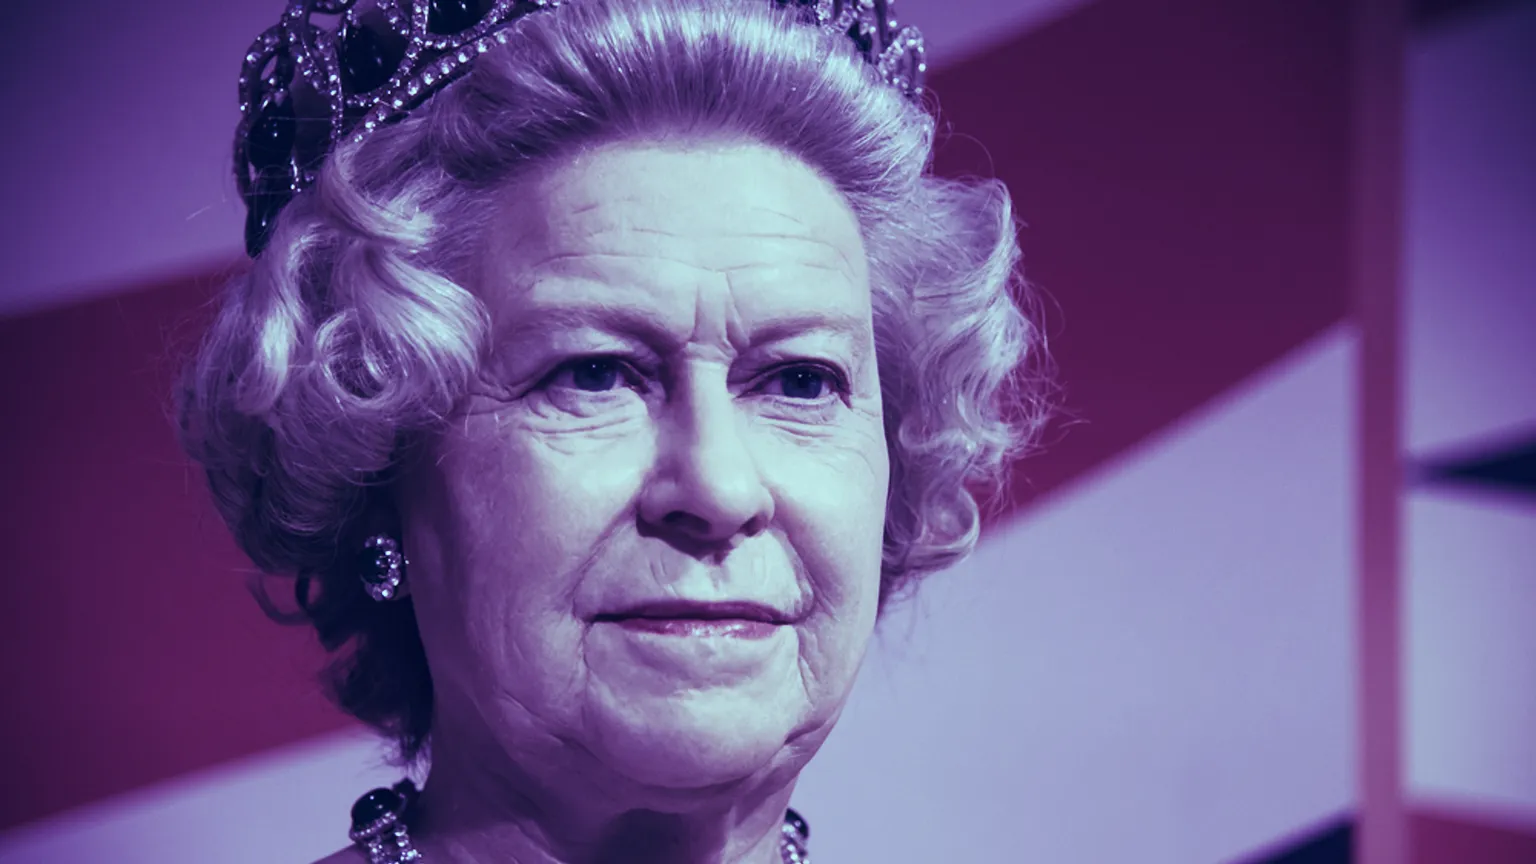 Queen Elizabeth II puts on a brave face as bitcoin's price plummets. PHOTO CREDIT: Shutterstock